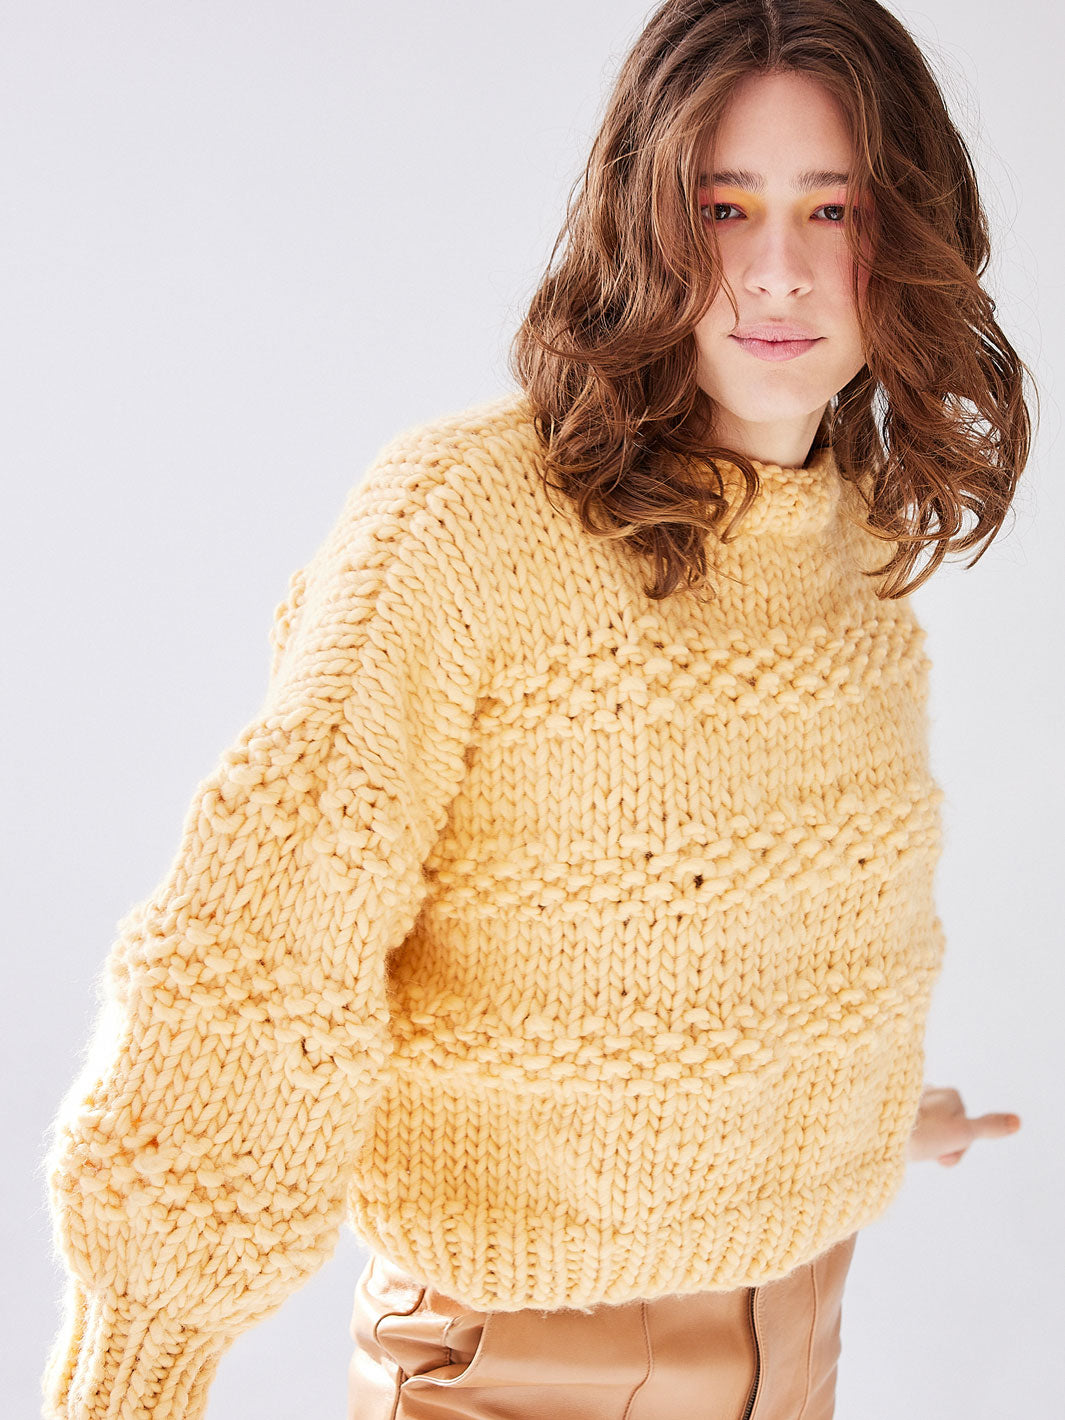 Woman looks directly at camera, she is wearing a chunky knitted yellow jumper and brown leather pants